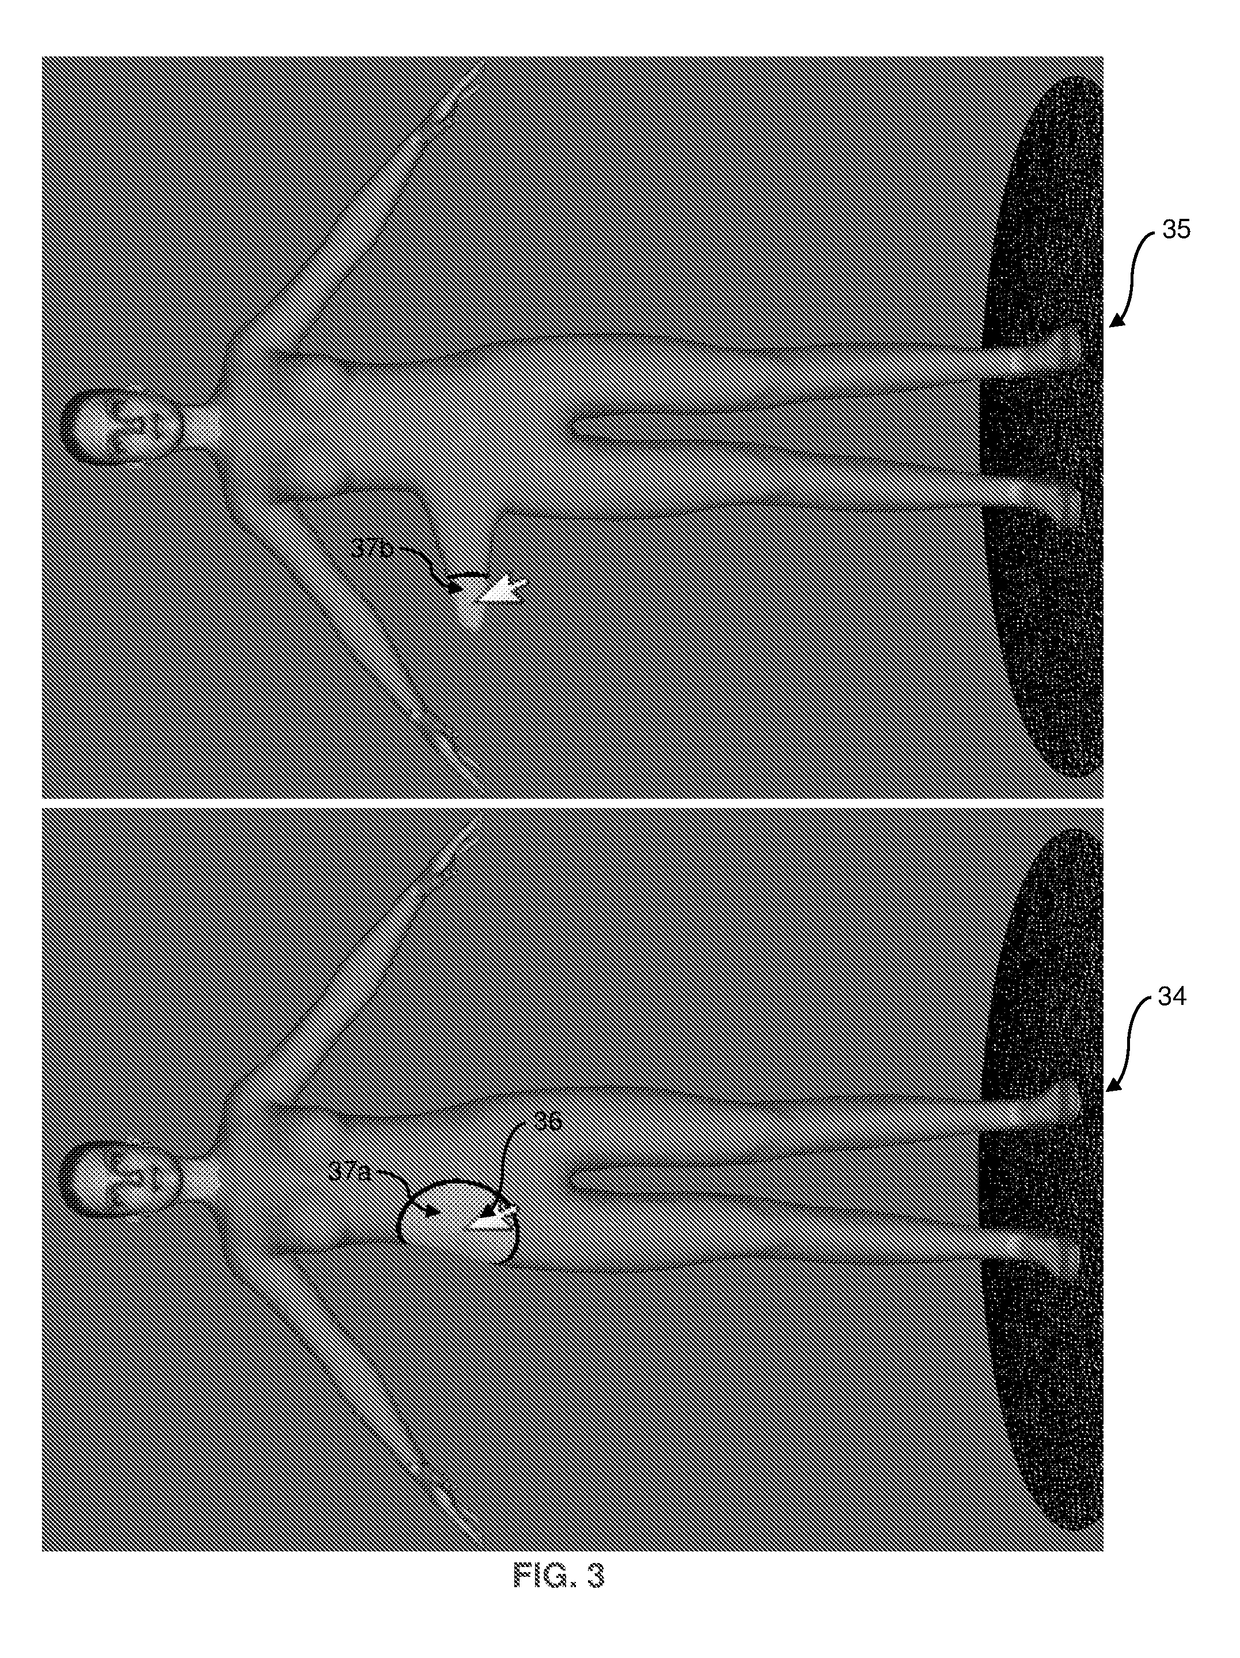 Computerized Method For Creating And Editing Surfaces To Represent Garments On The Body Of A Mannequin In A Virtual Three-dimensional Environment